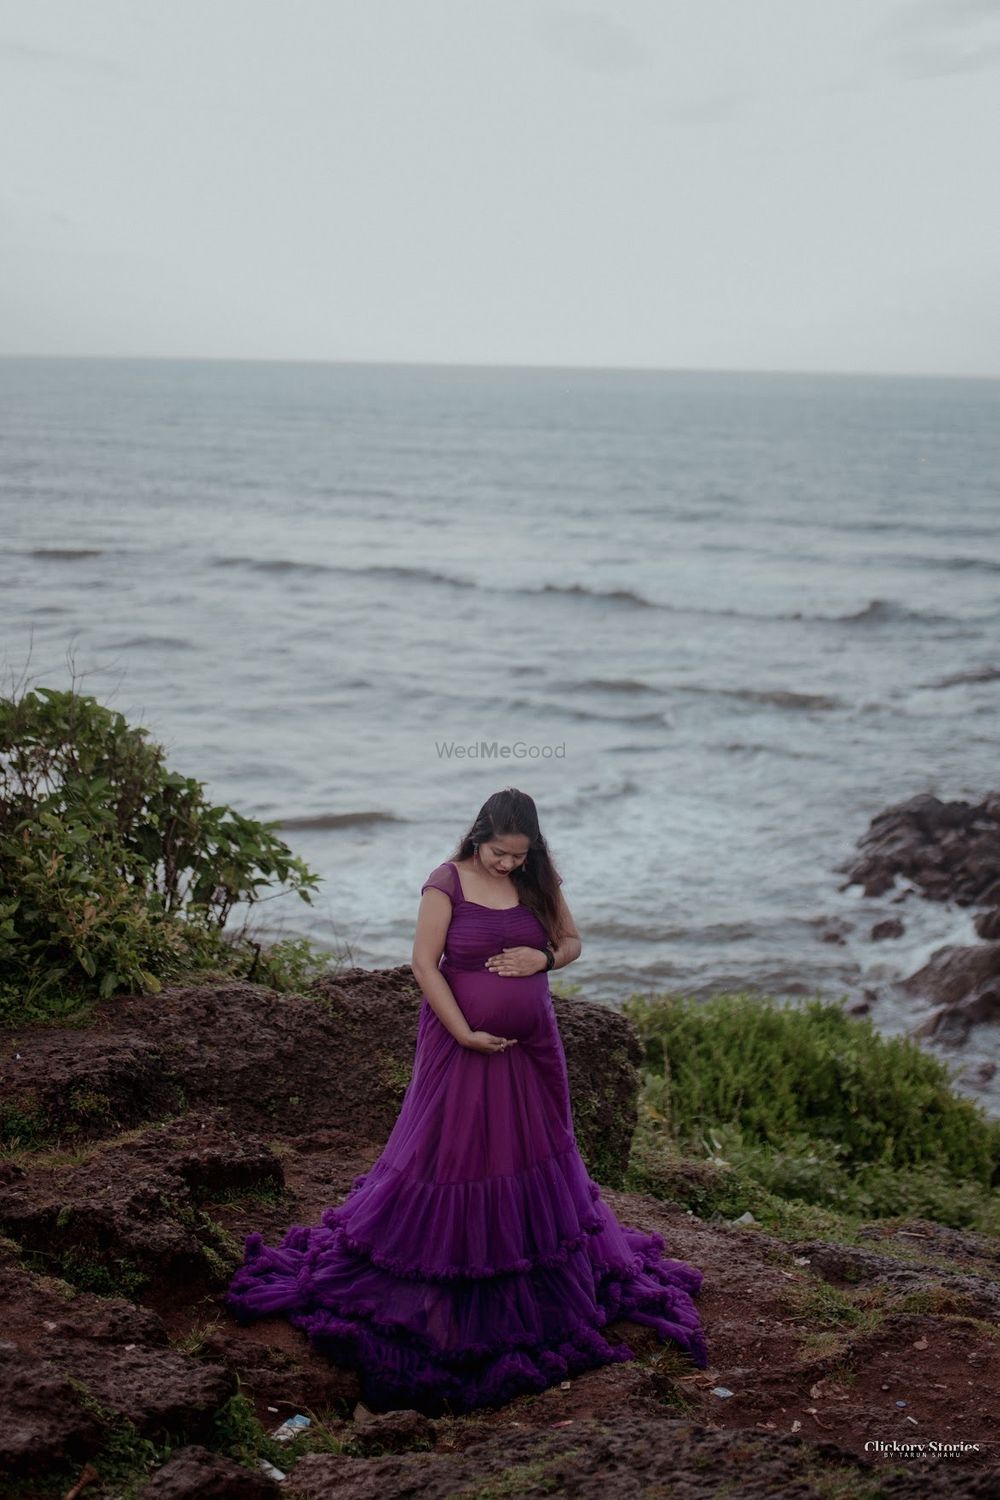 Photo From Maternity  Shoot - By Clickory Stories Photography by Tarun Shahu